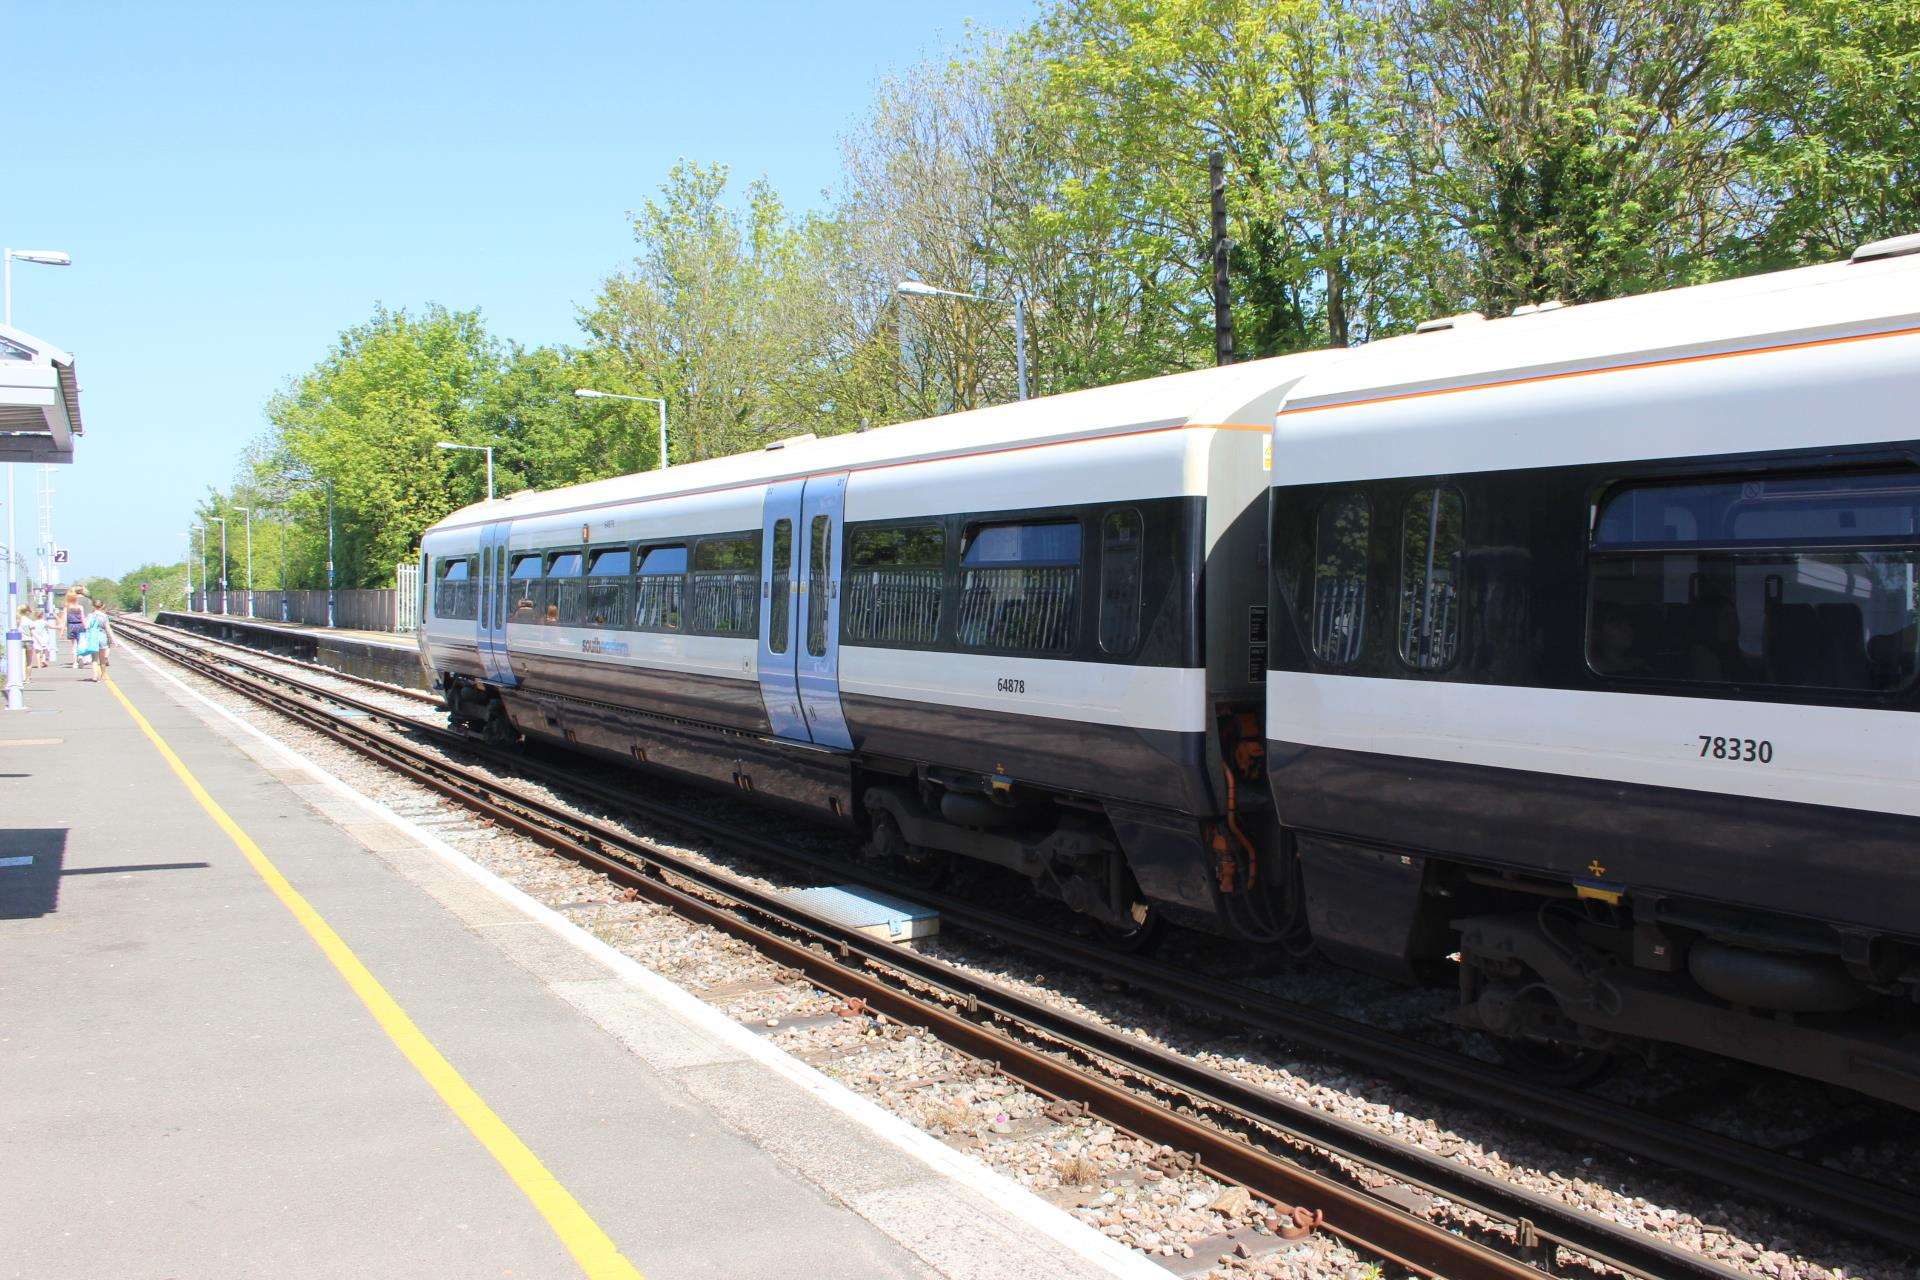 The new timetables mean commuters are spending longer on trains